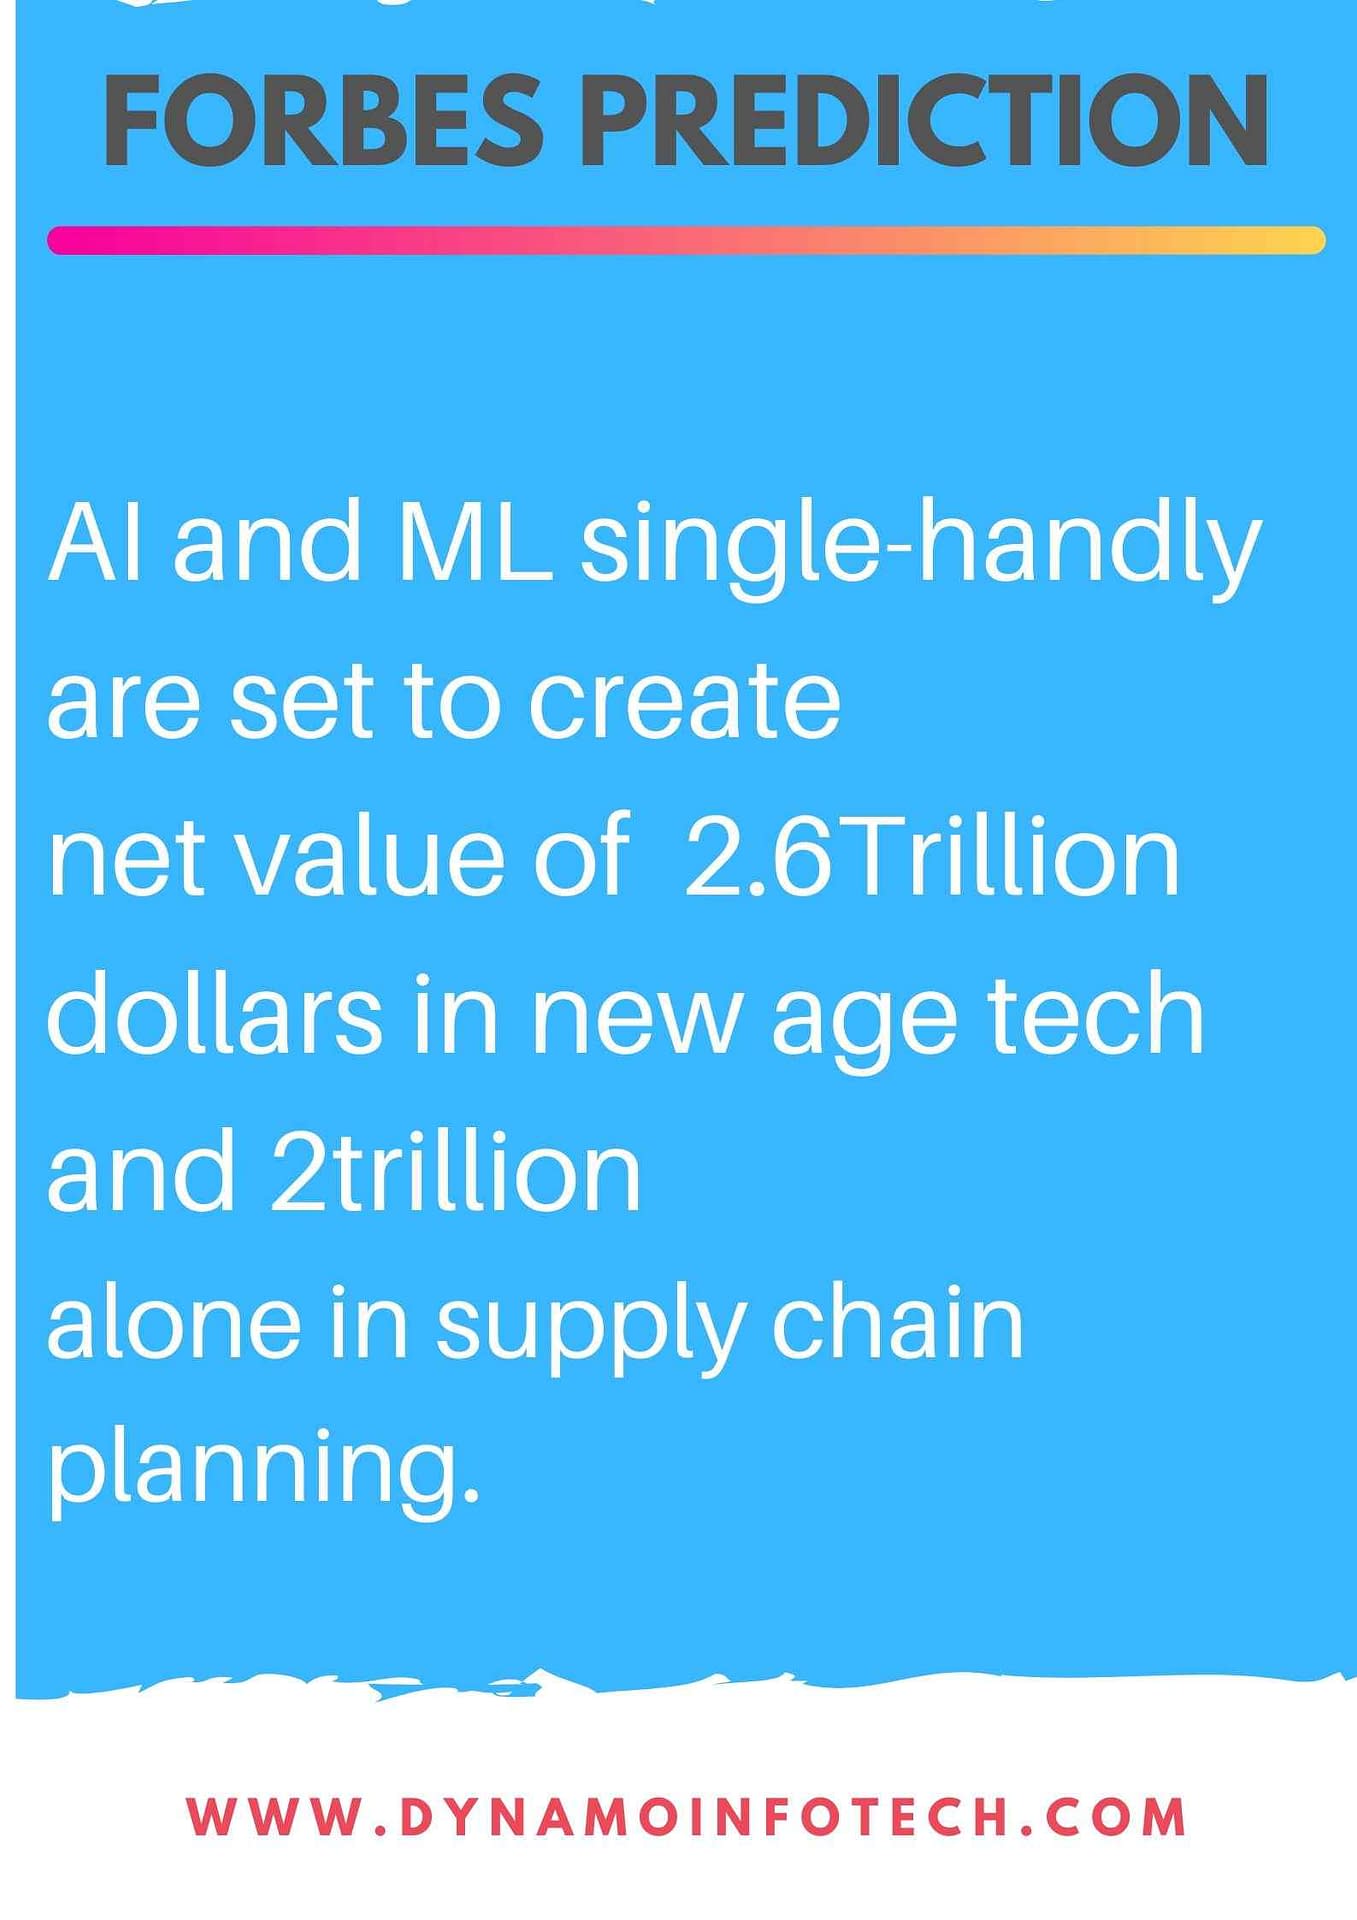 forbes prediction on machine learning and artificial intelligence for the year 2020